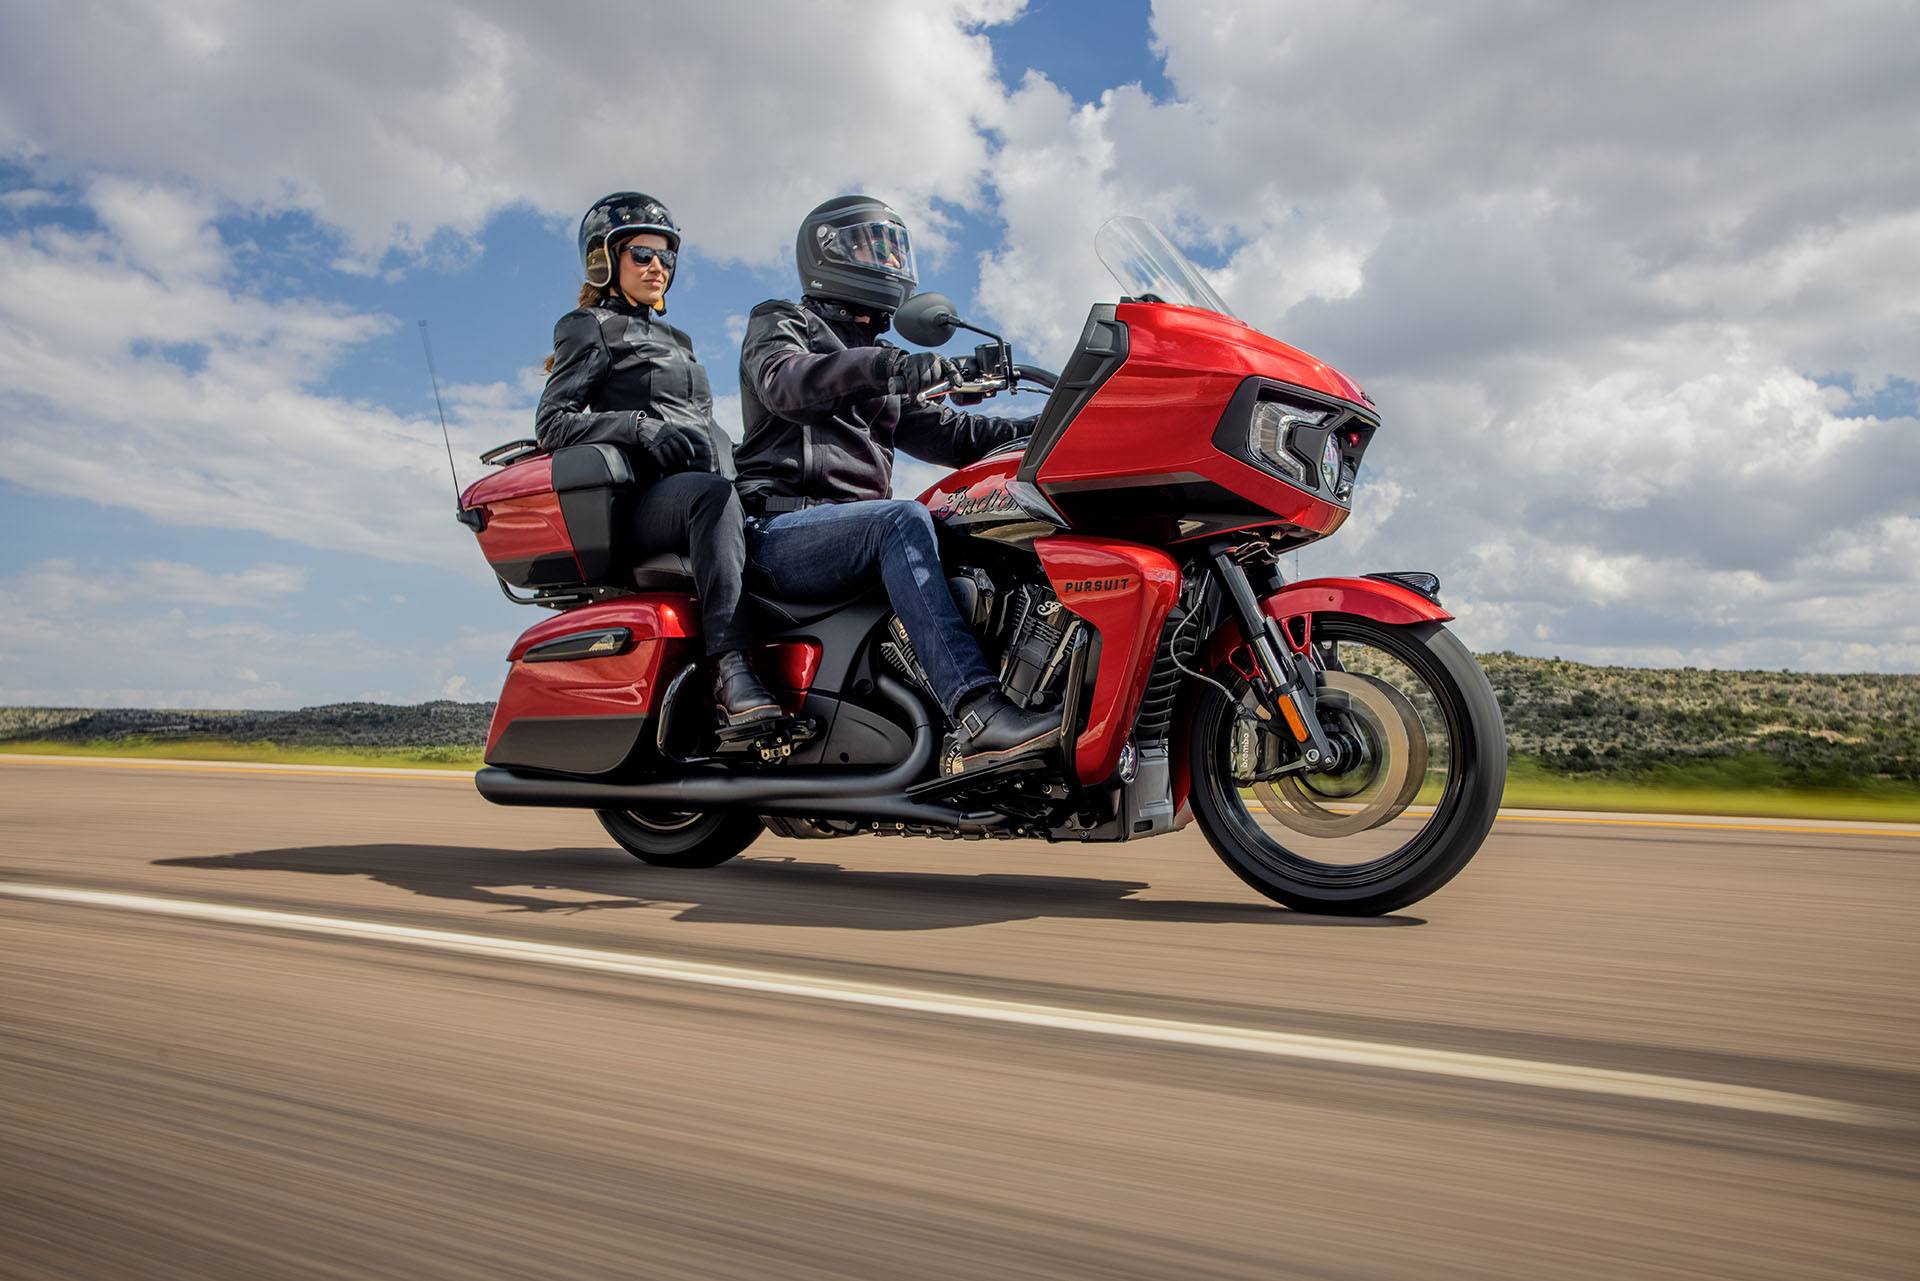 2022 Indian Motorcycle Pursuit® Dark Horse® with Premium Package in Newport News, Virginia - Photo 9